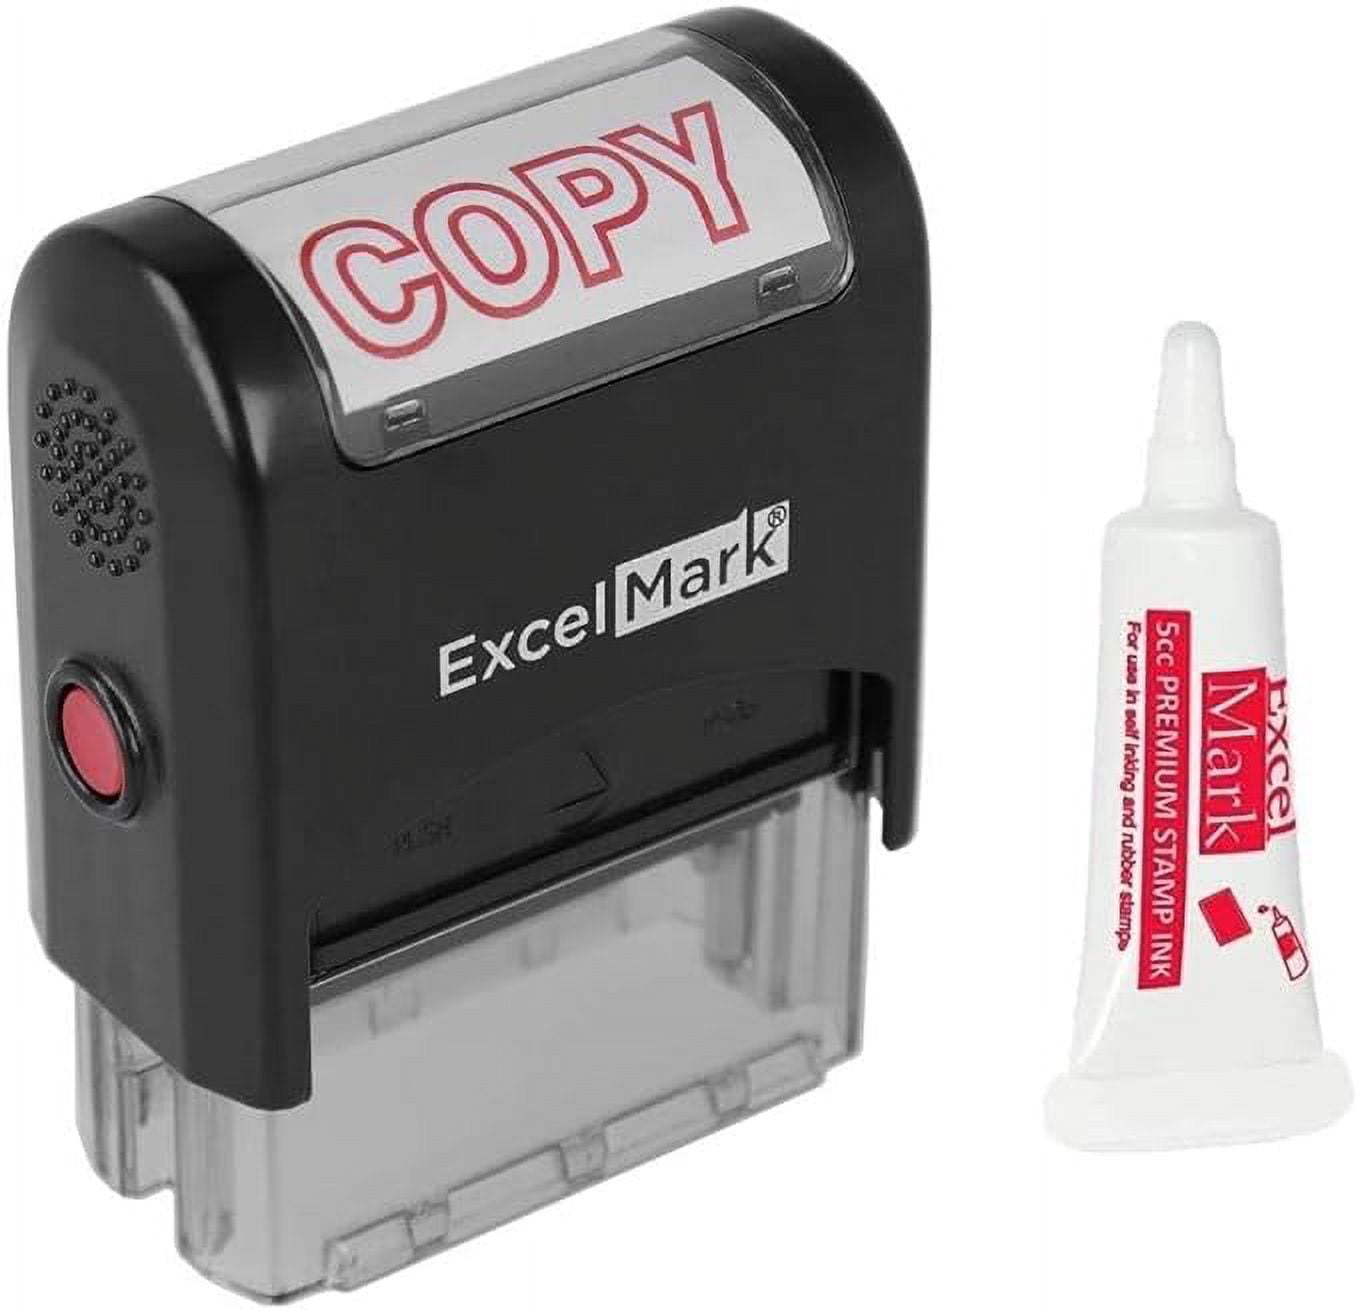 ExcelMark Rubber Stamp Ink Pad Extra Large 4-1/4 by 7-1/4 Black